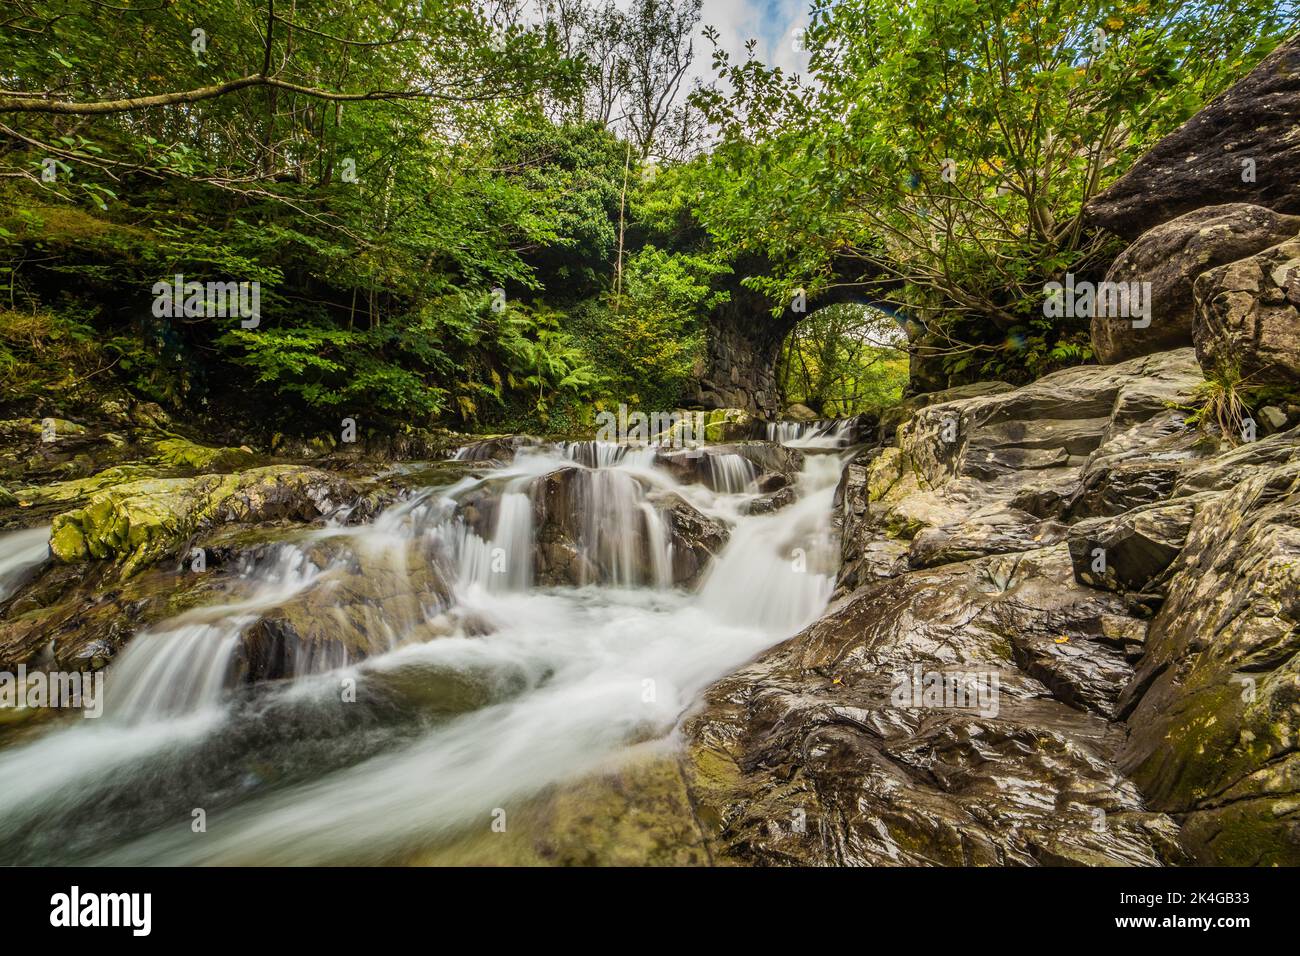 Coniston, Cumbria, UK. 2nd October 2022. UK Weather. Sunshine and showers from Church Beck in the Coppermines Valley, English Lake District, Coniston, Cumbria. Credit:greenburn/Alamy Live News. Stock Photo